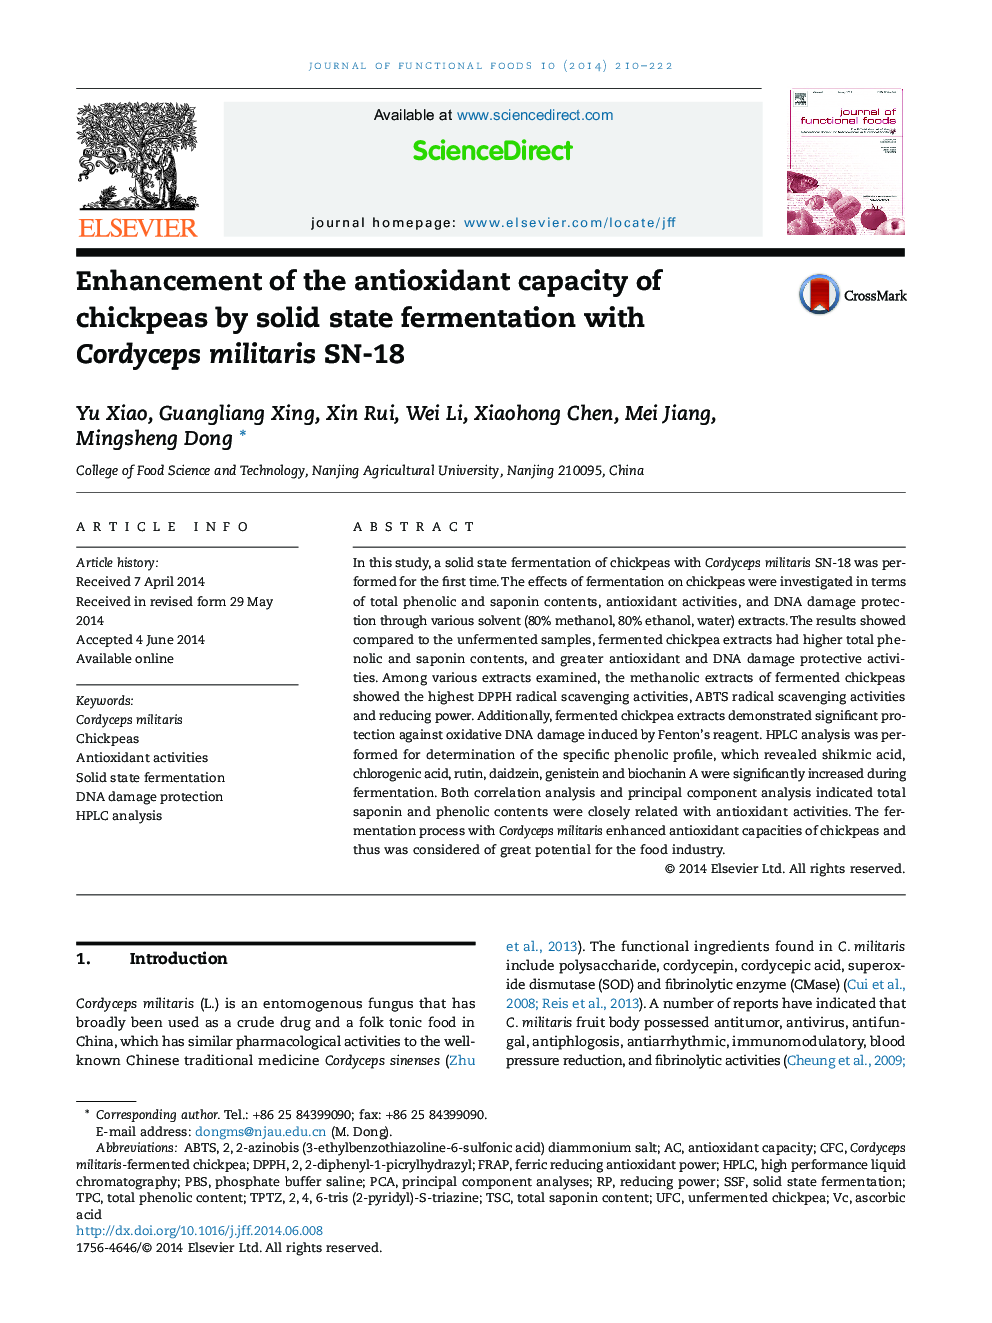 Enhancement of the antioxidant capacity of chickpeas by solid state fermentation with Cordyceps militaris SN-18